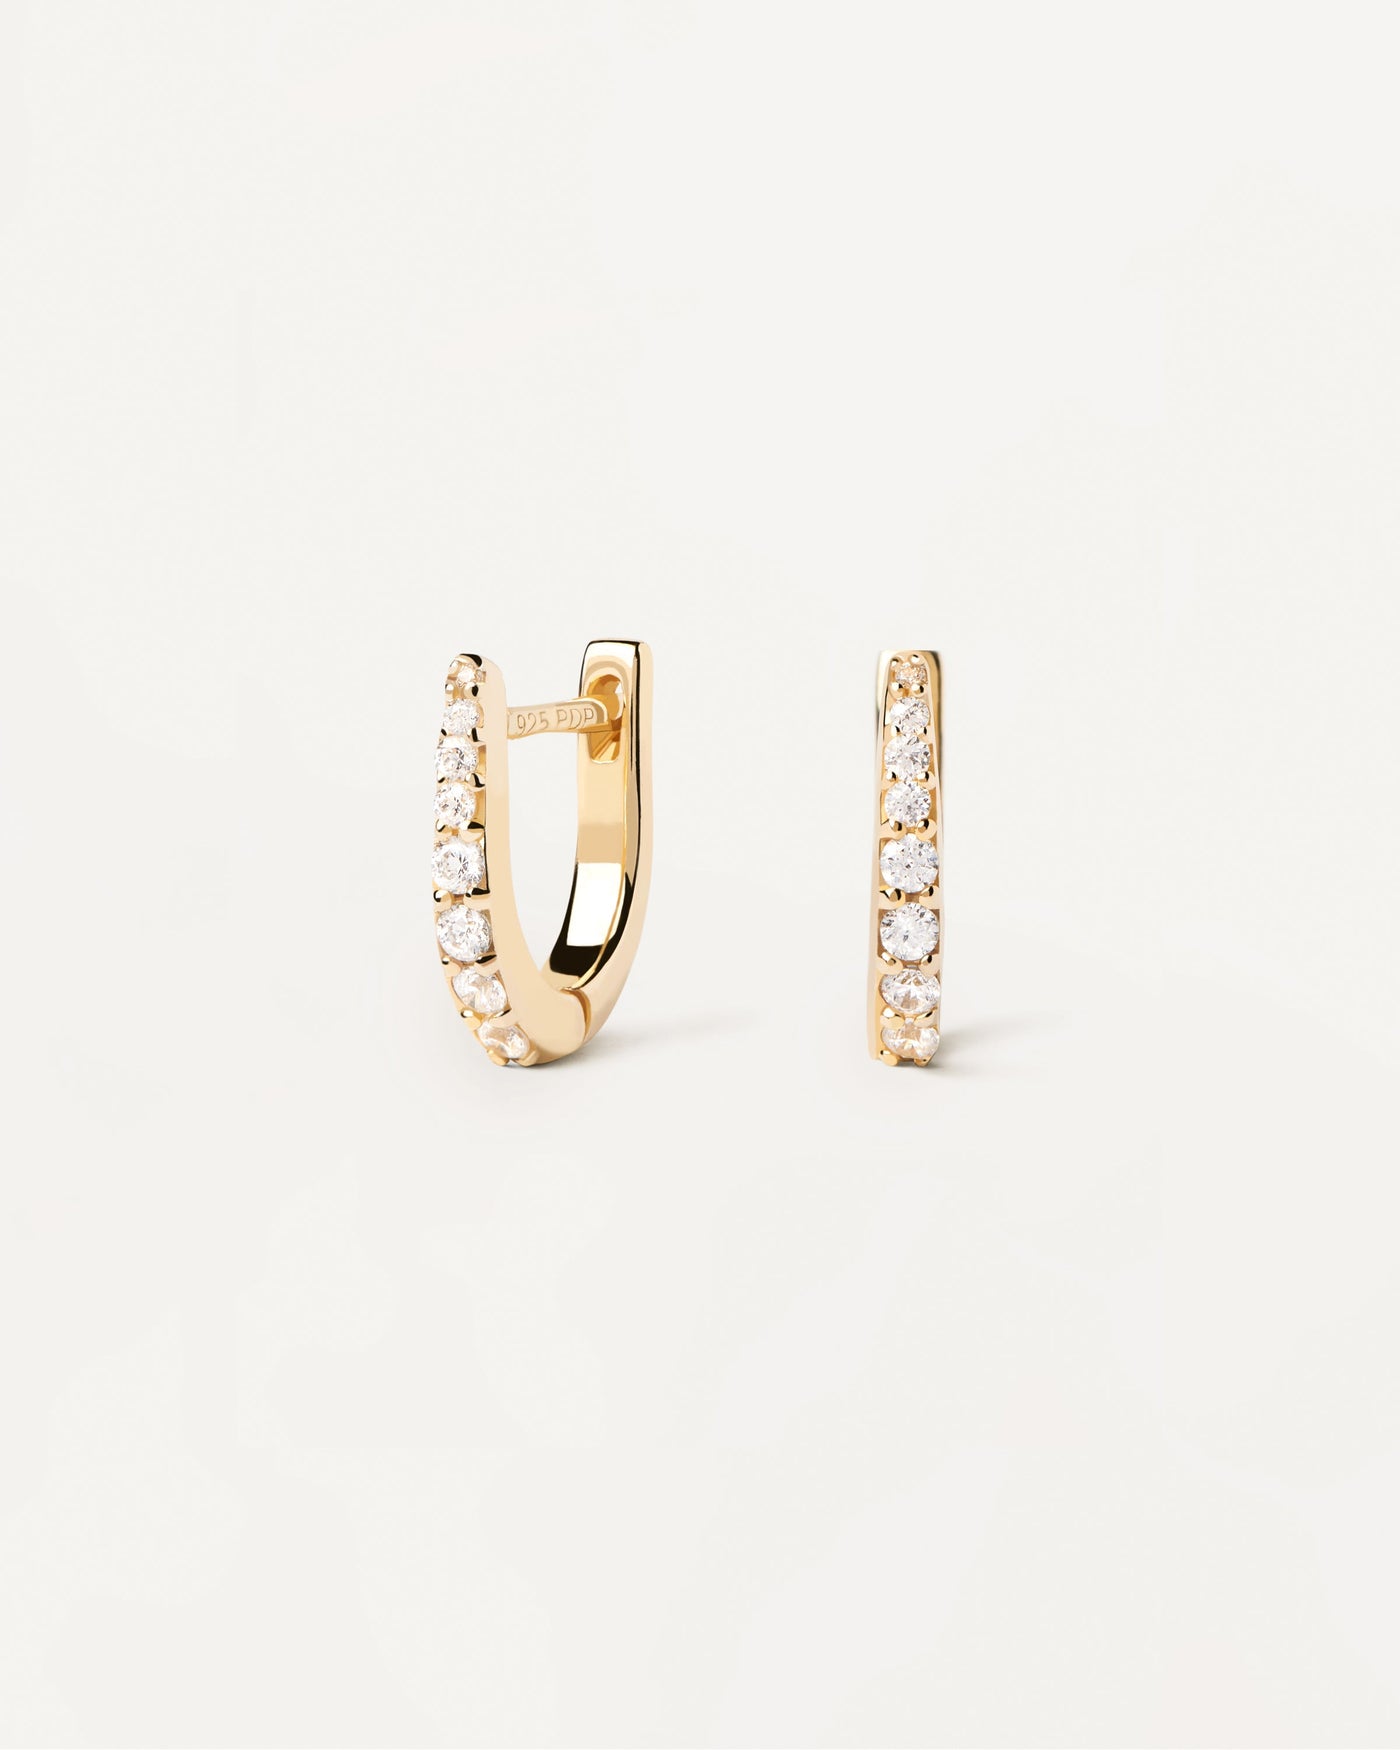 2023 Selection | Stare Earrings. Pointy hoops in gold-plated silver with white zirconia. Get the latest arrival from PDPAOLA. Place your order safely and get this Best Seller. Free Shipping.